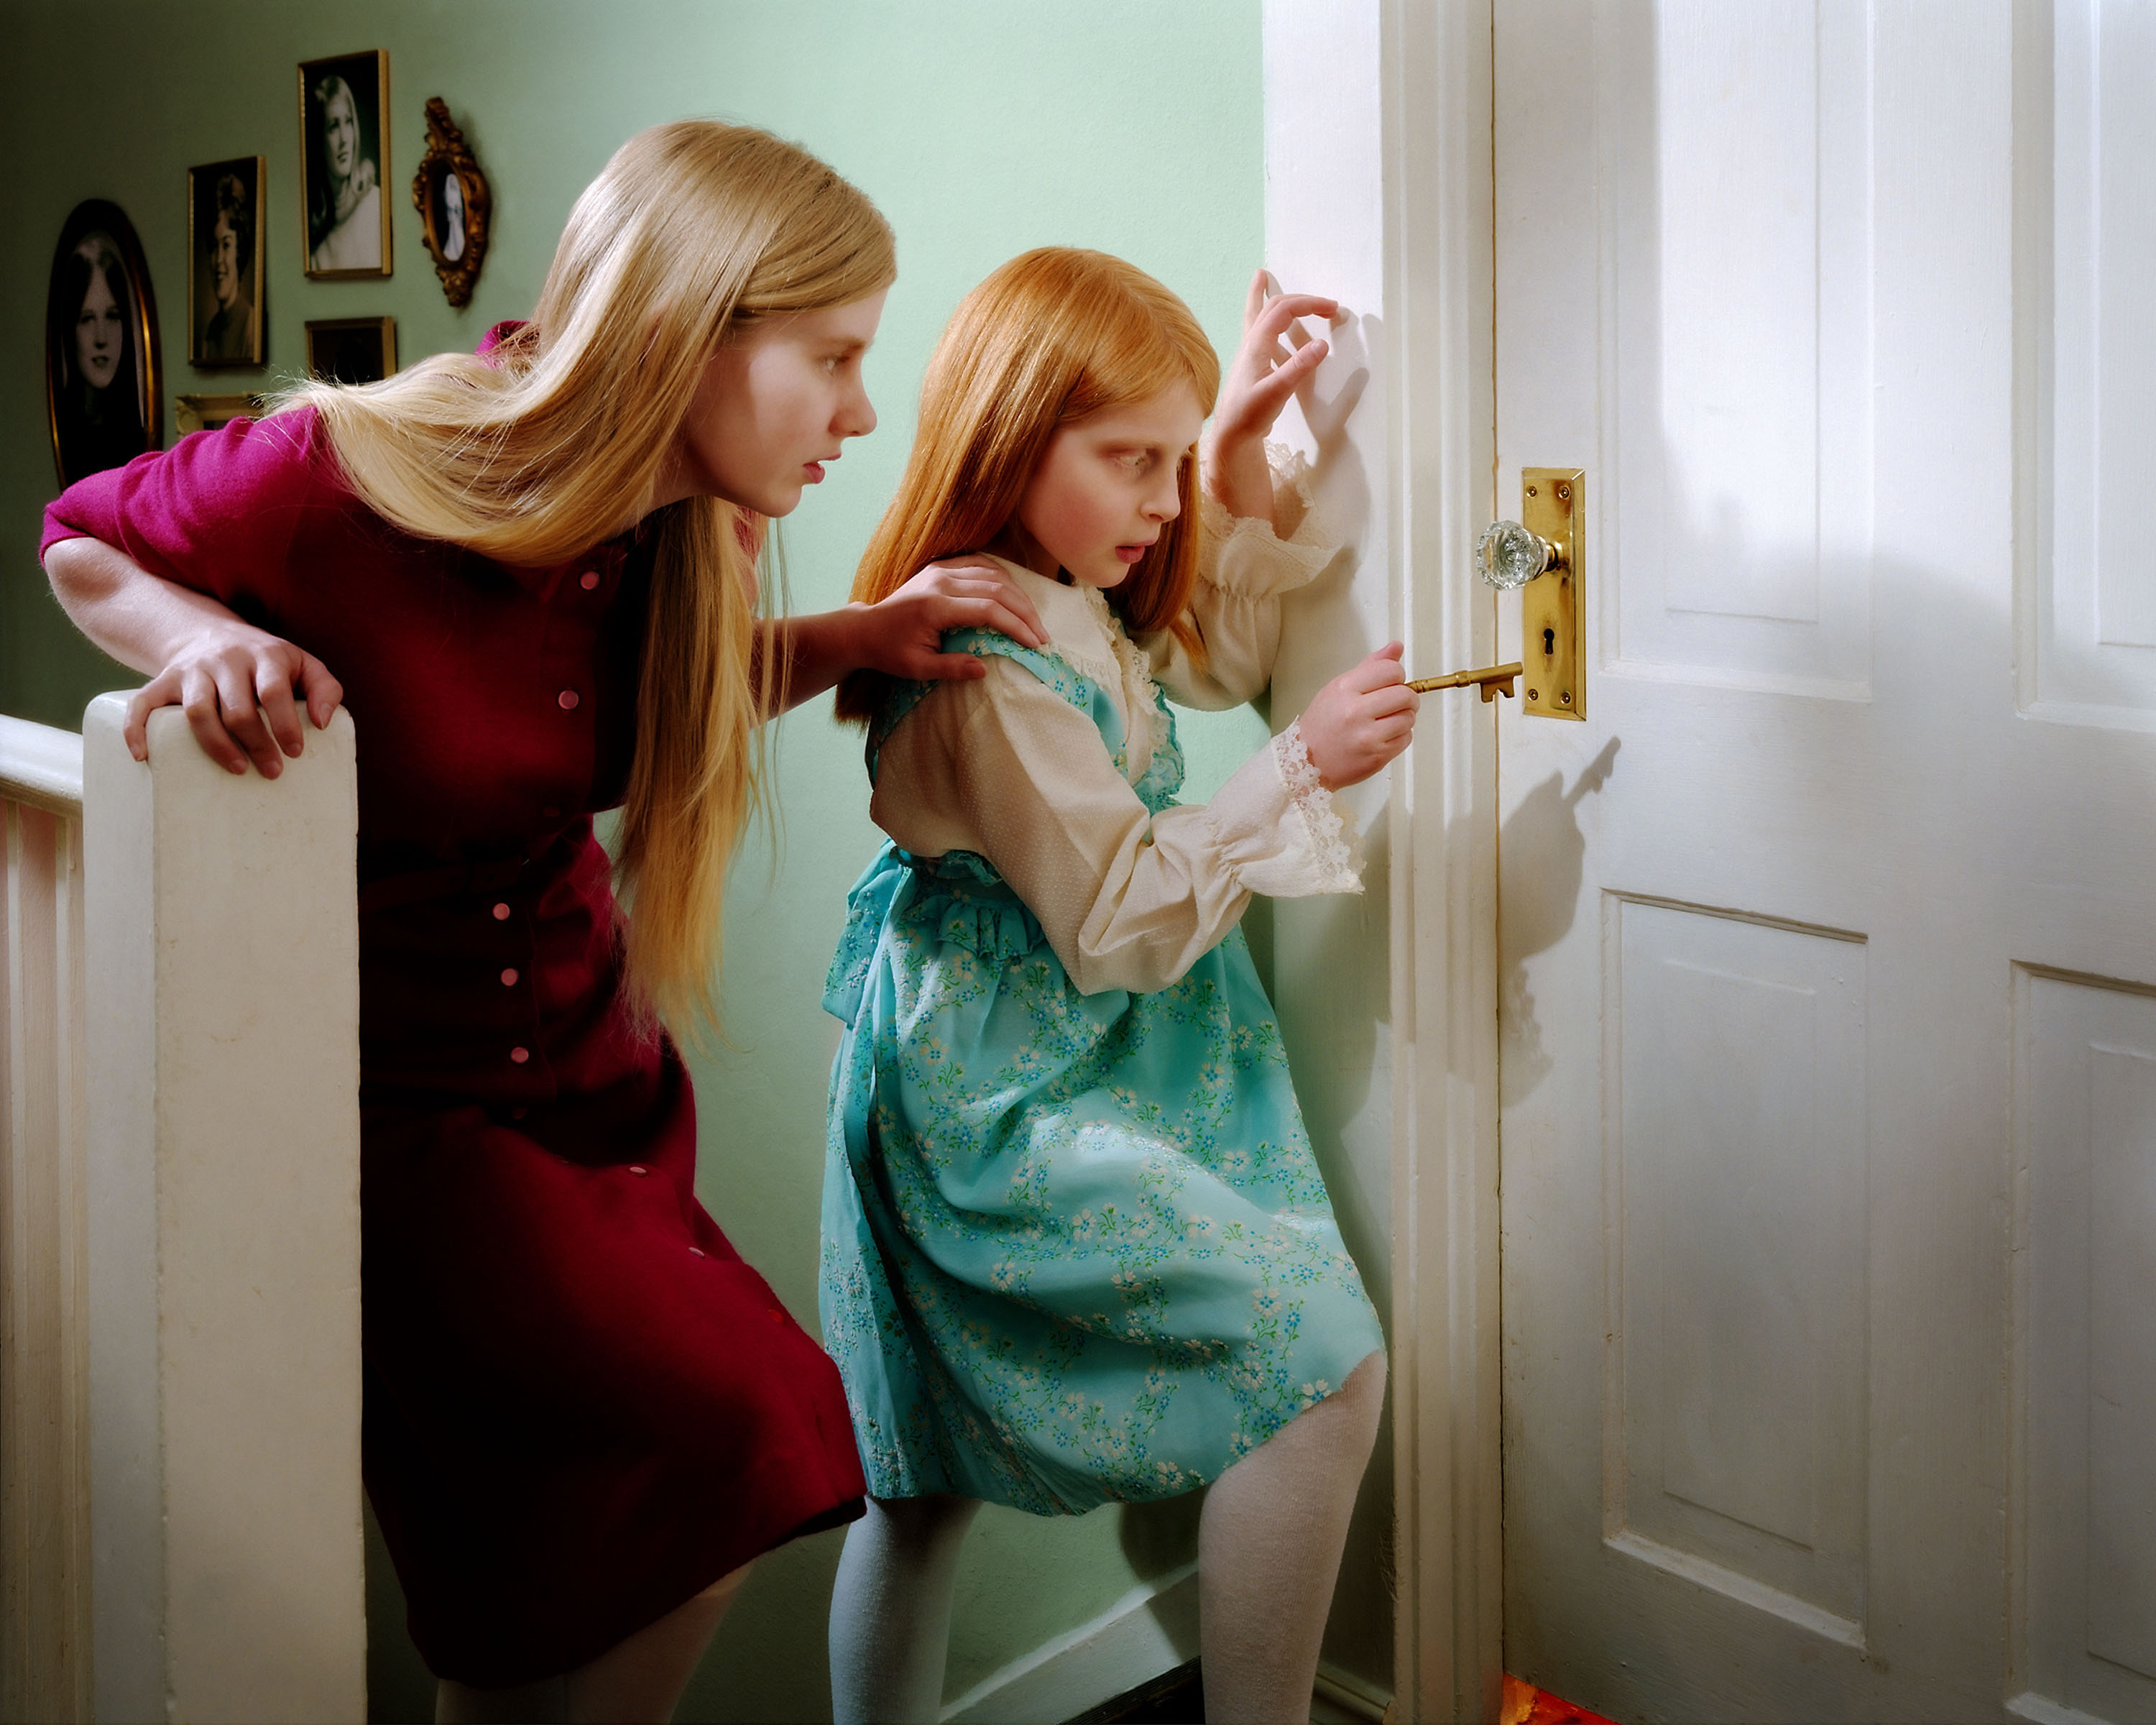 Color photograph of two young girls holding a key up to a locked door.